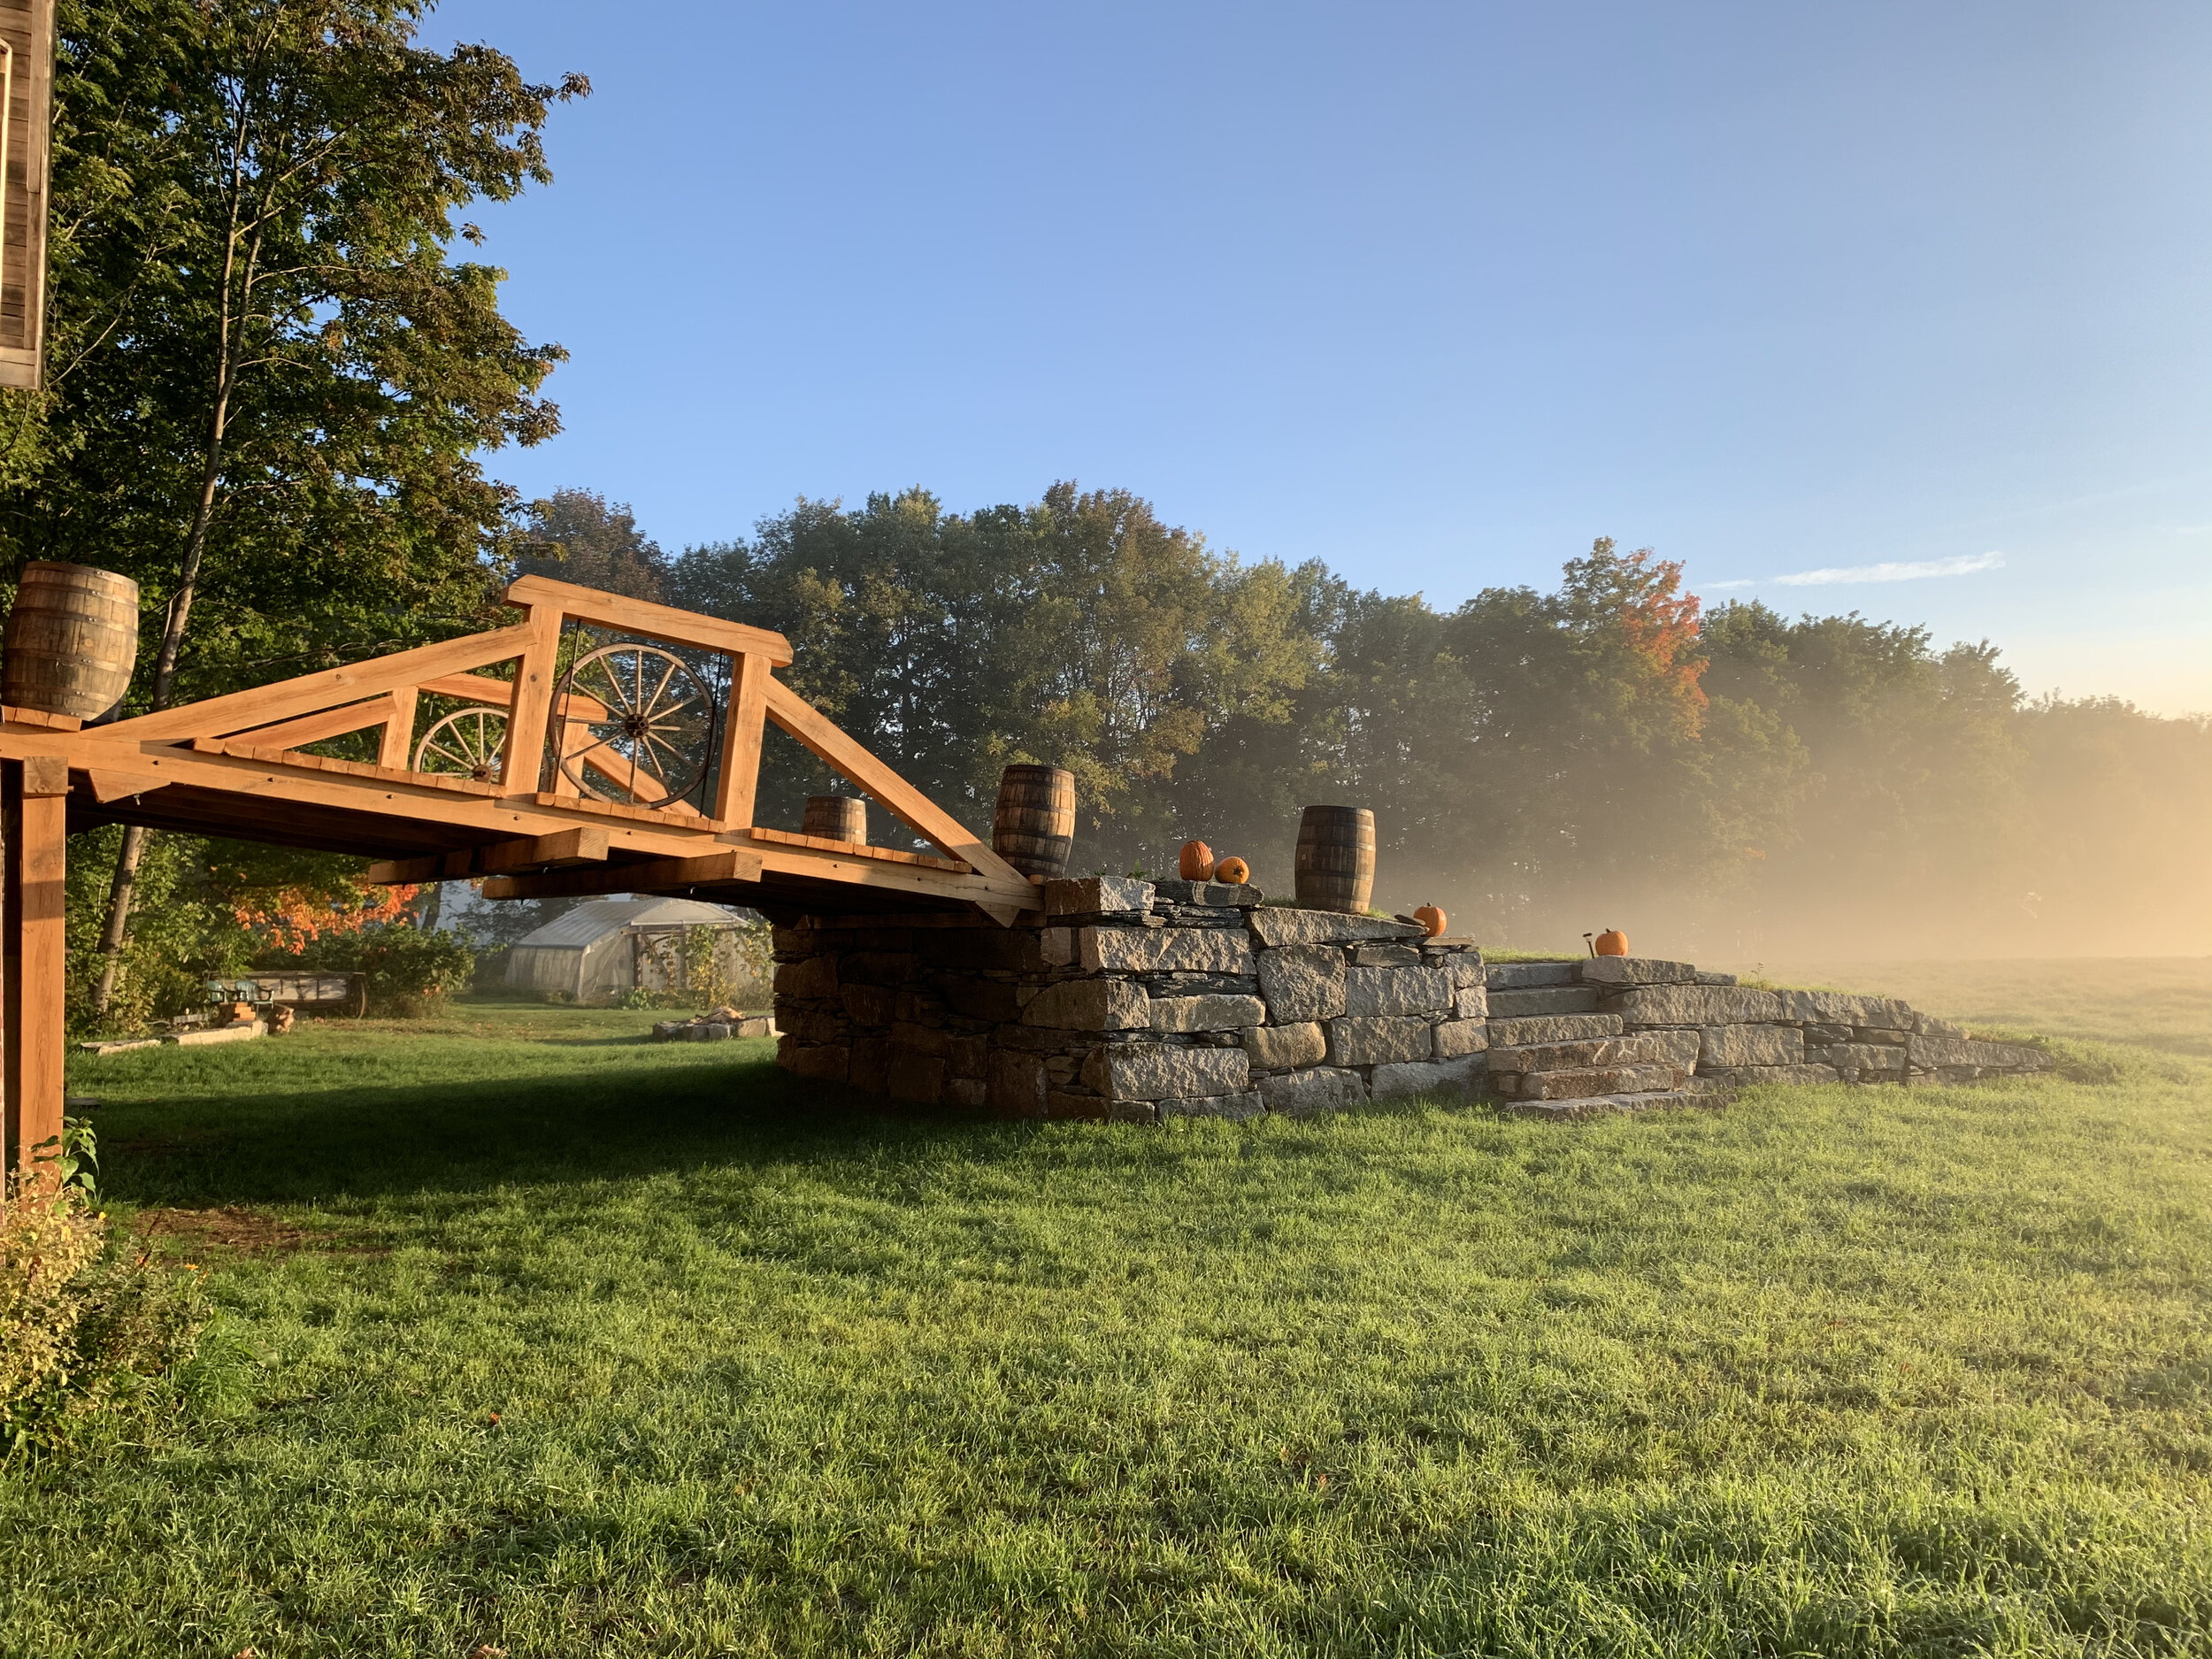 The bridge heading out of the barn to stone steps in a field covered in fog